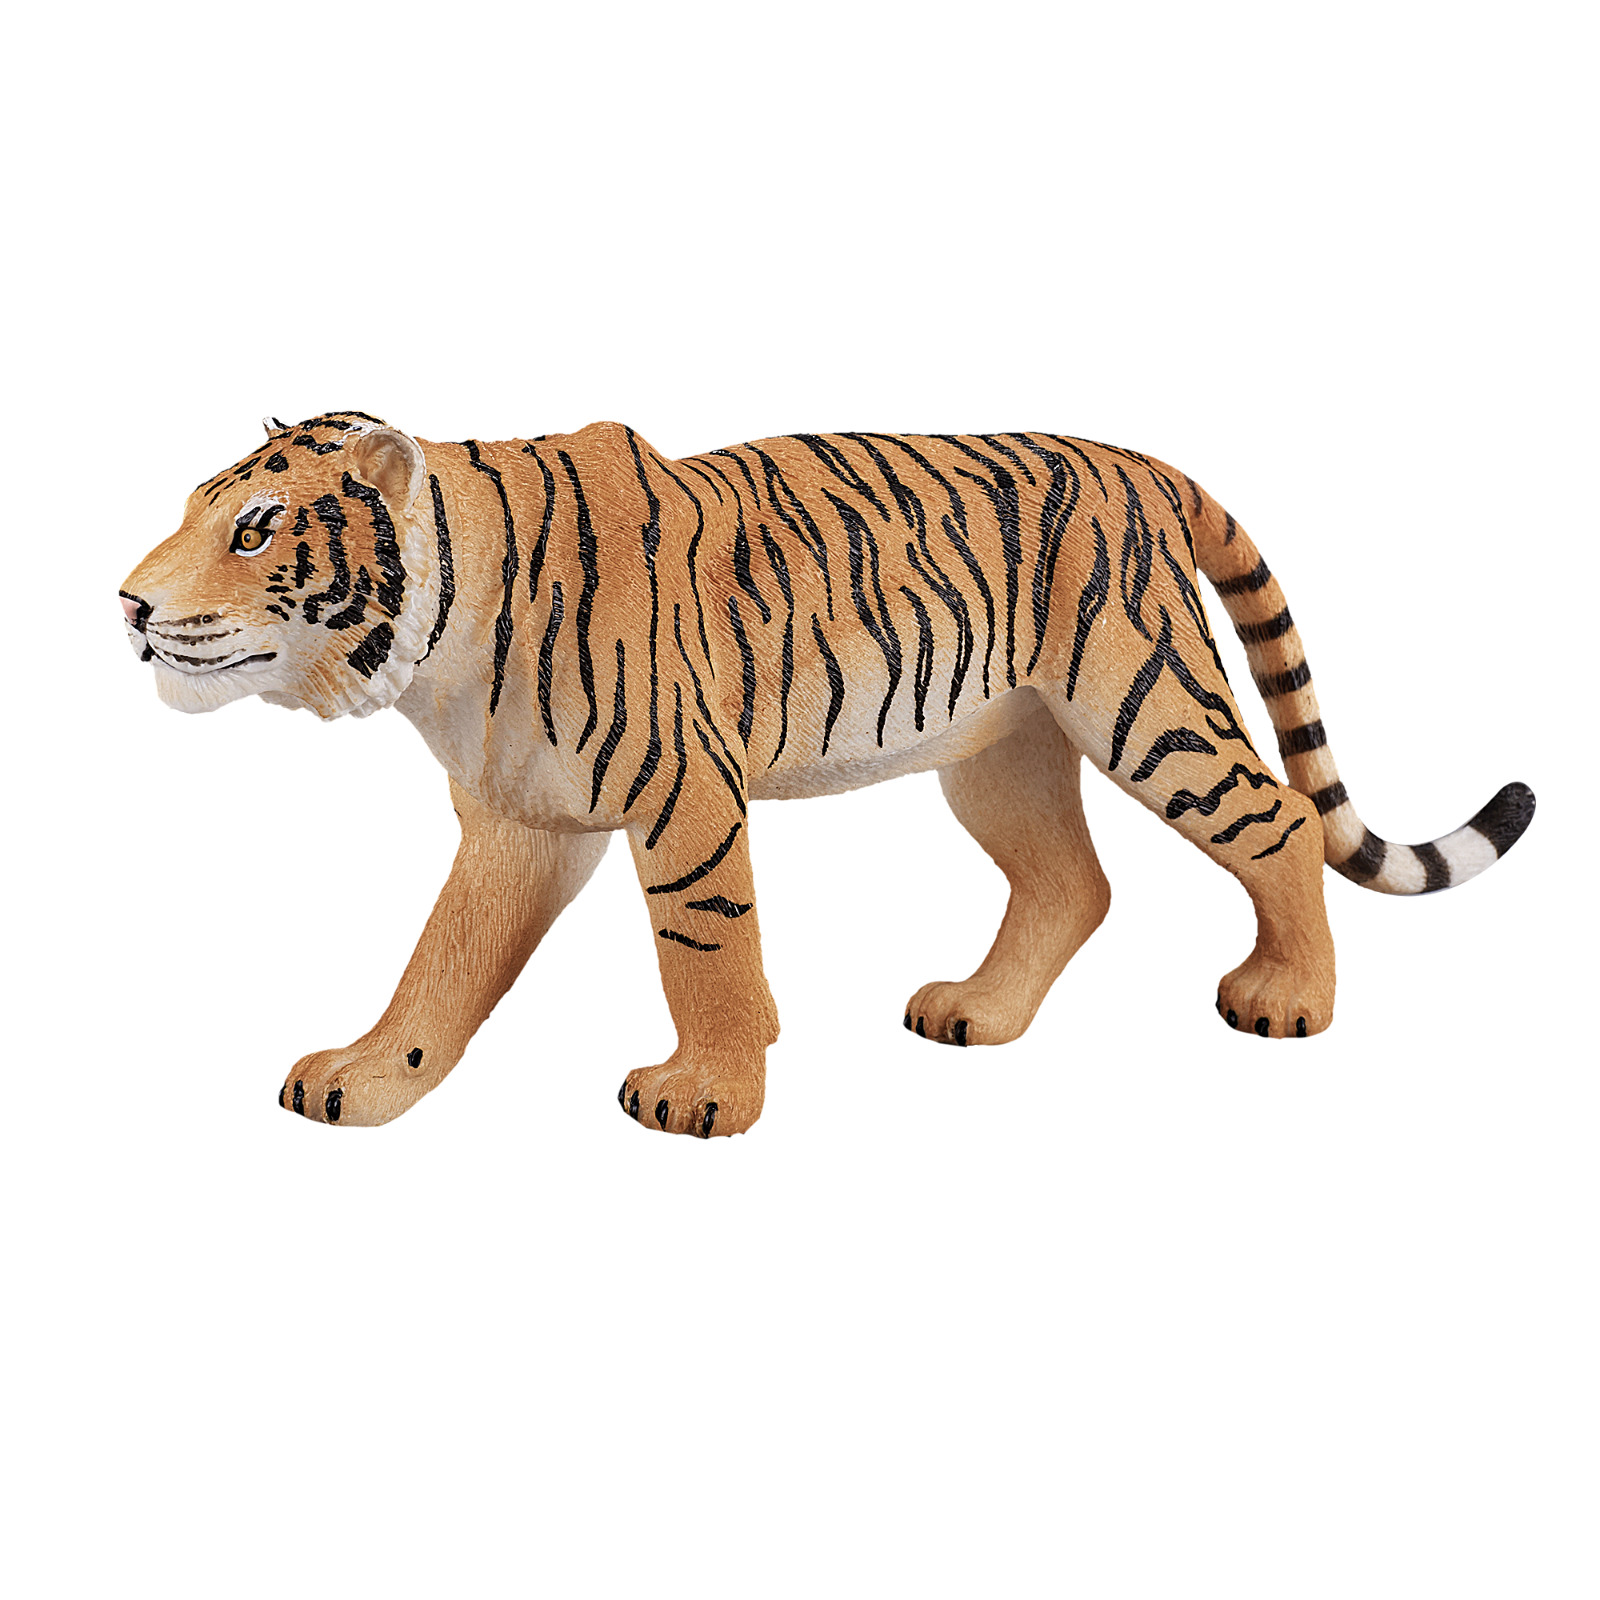 Mojo BENGAL TIGER Wild zoo animals play model figure toys plastic forest jungle